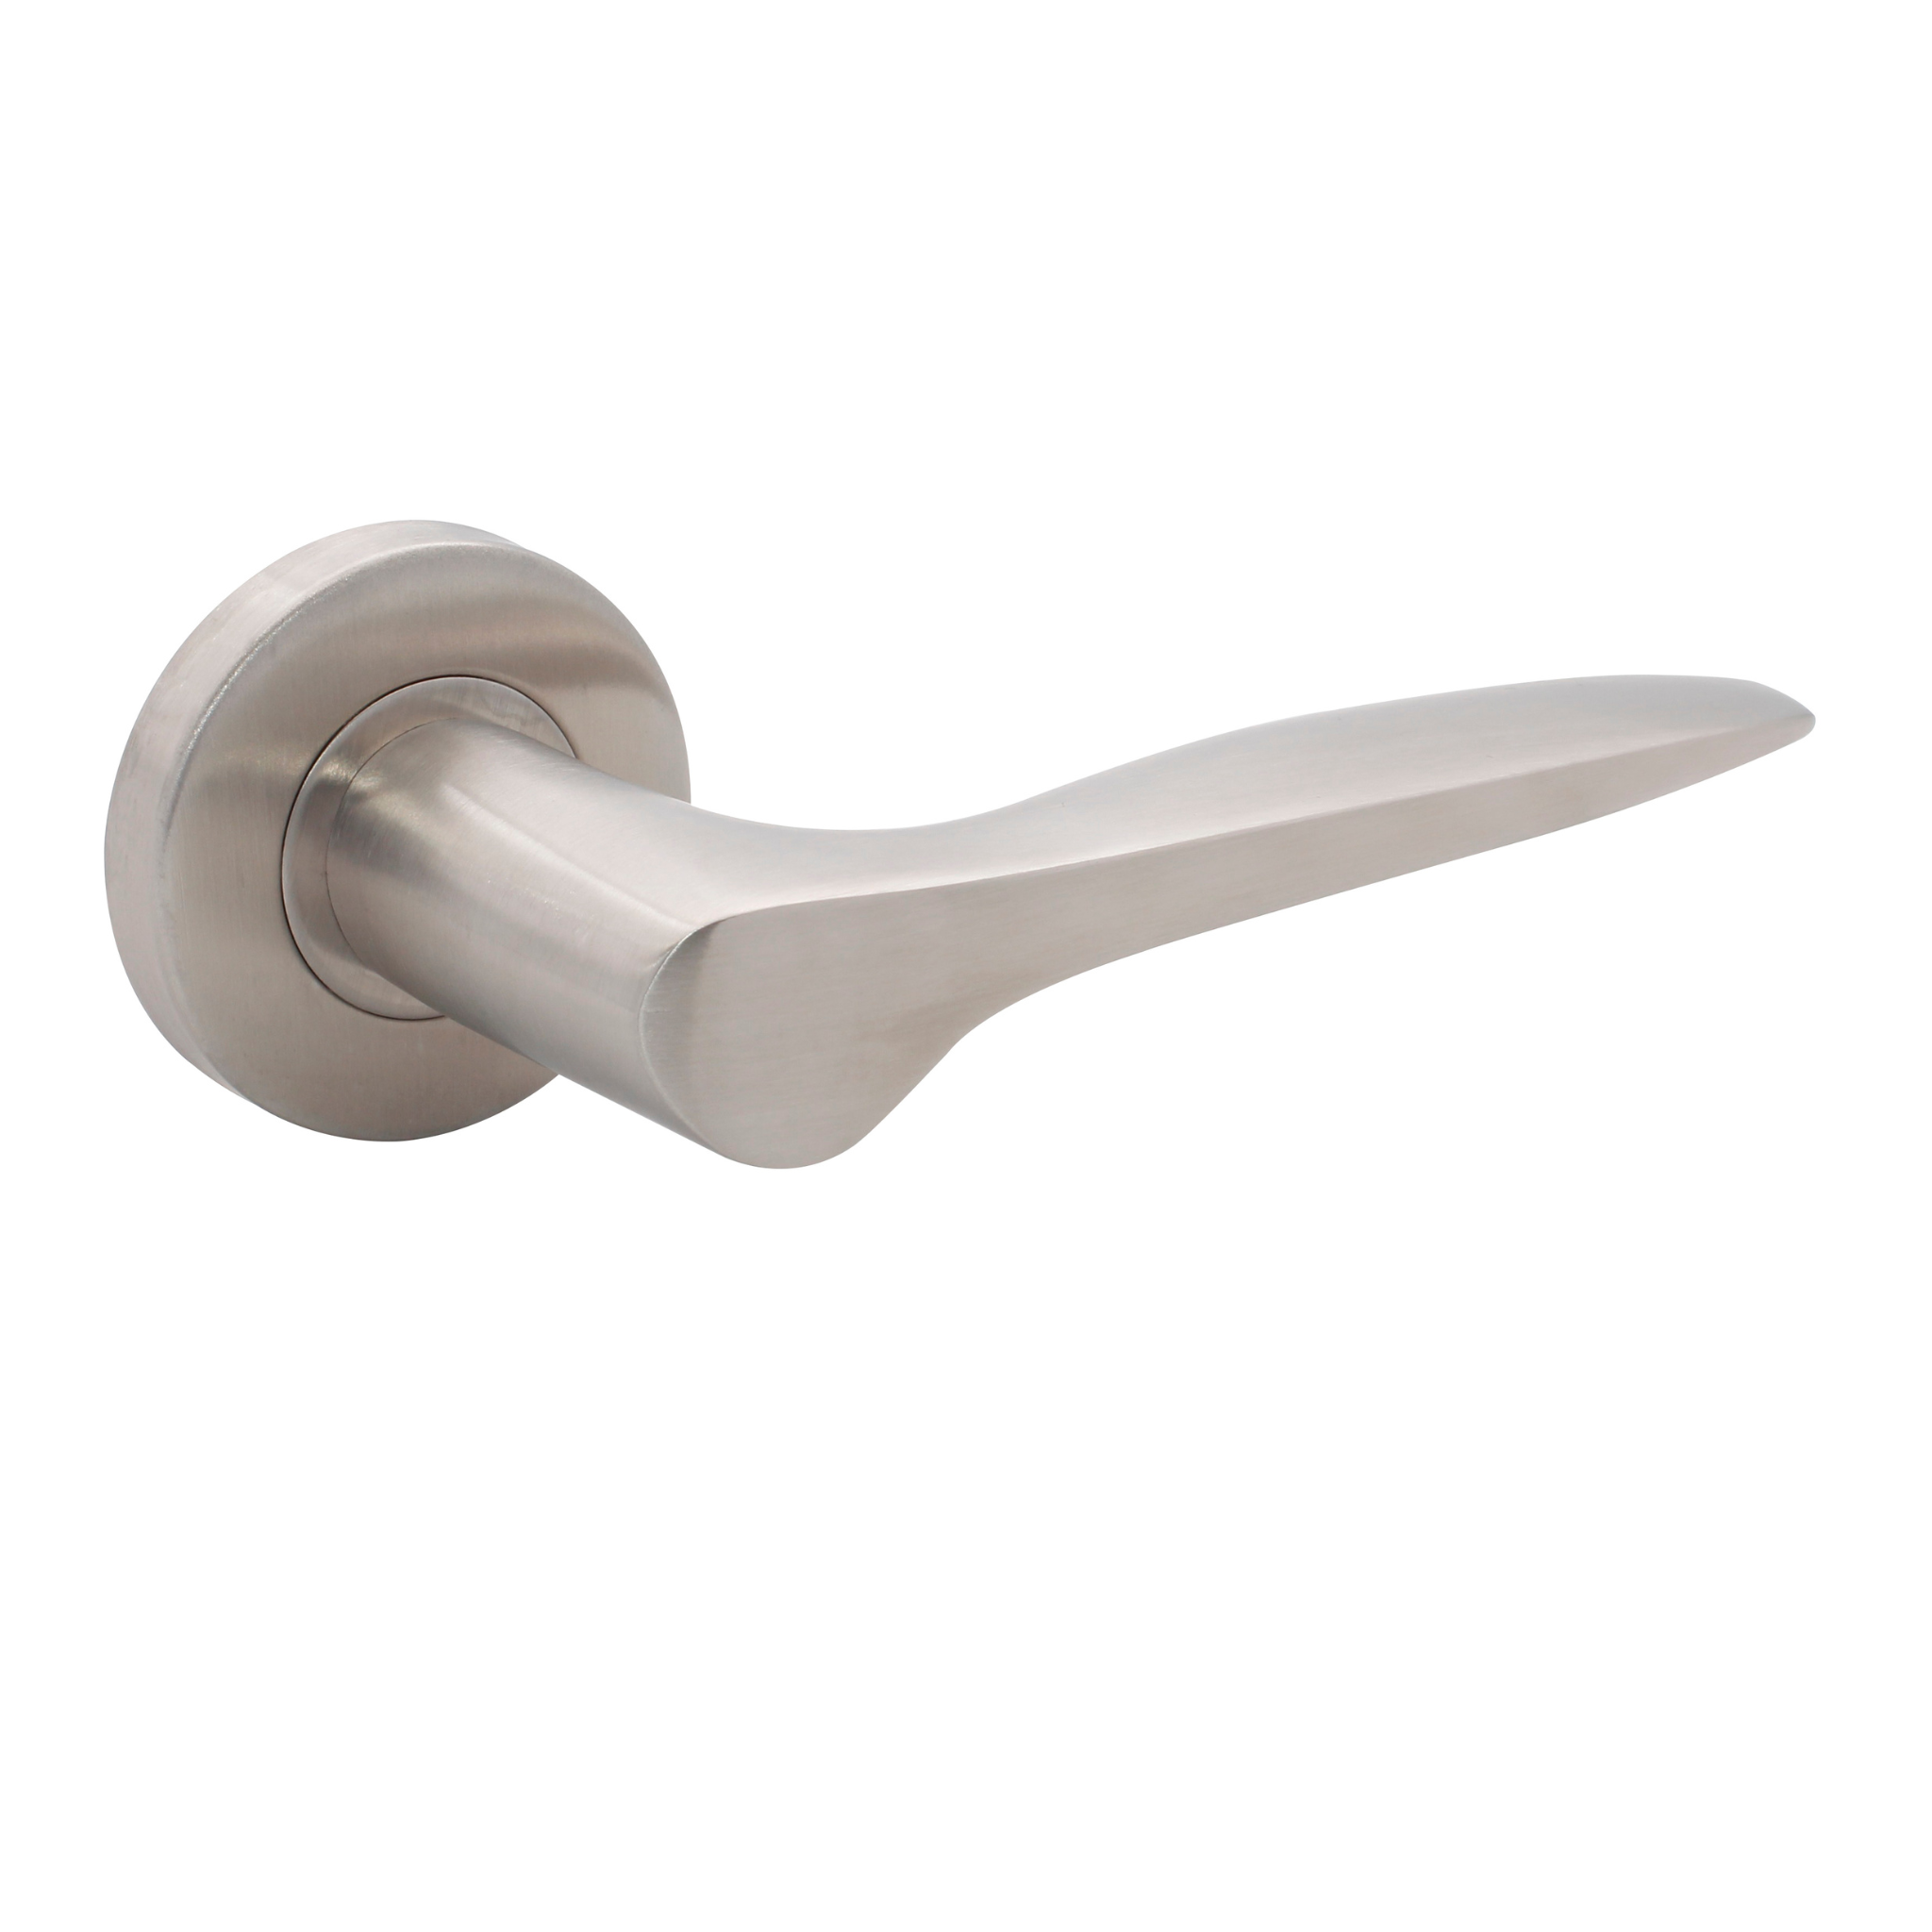 FS109.R._.SS, Lever Handles, Solid, On Round Rose, With Escutcheons, Stainless Steel, CISA